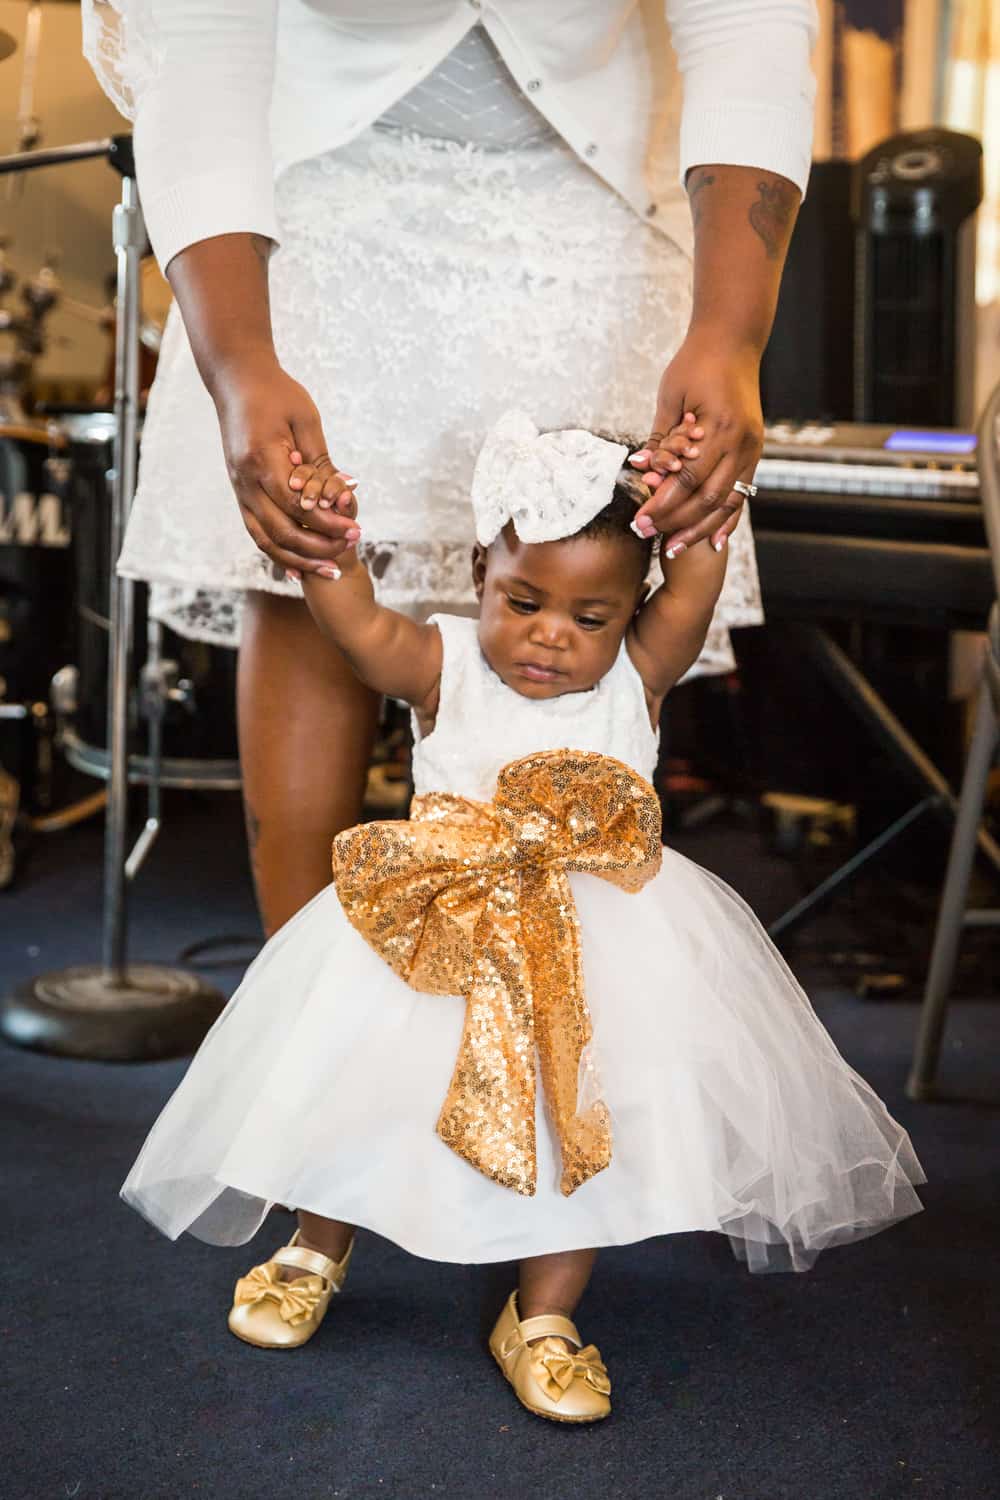 Mother's hands holding baby girl wearing white dress and gold sash